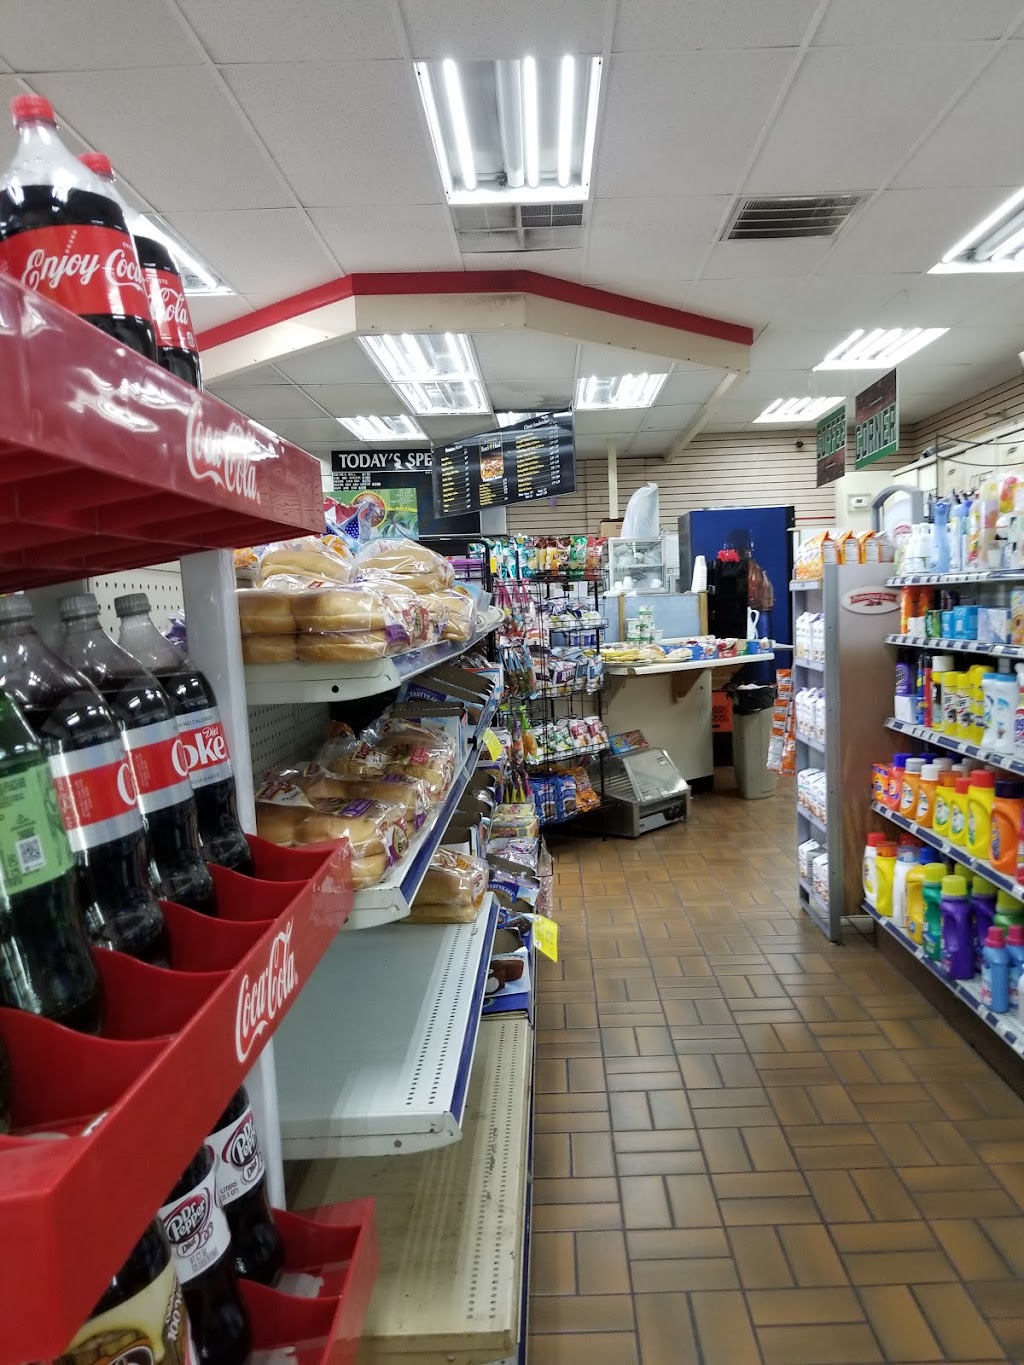 Mikes Dairy & Deli | 160 First Ave, Atlantic Highlands, NJ 07716 | Phone: (732) 872-8743